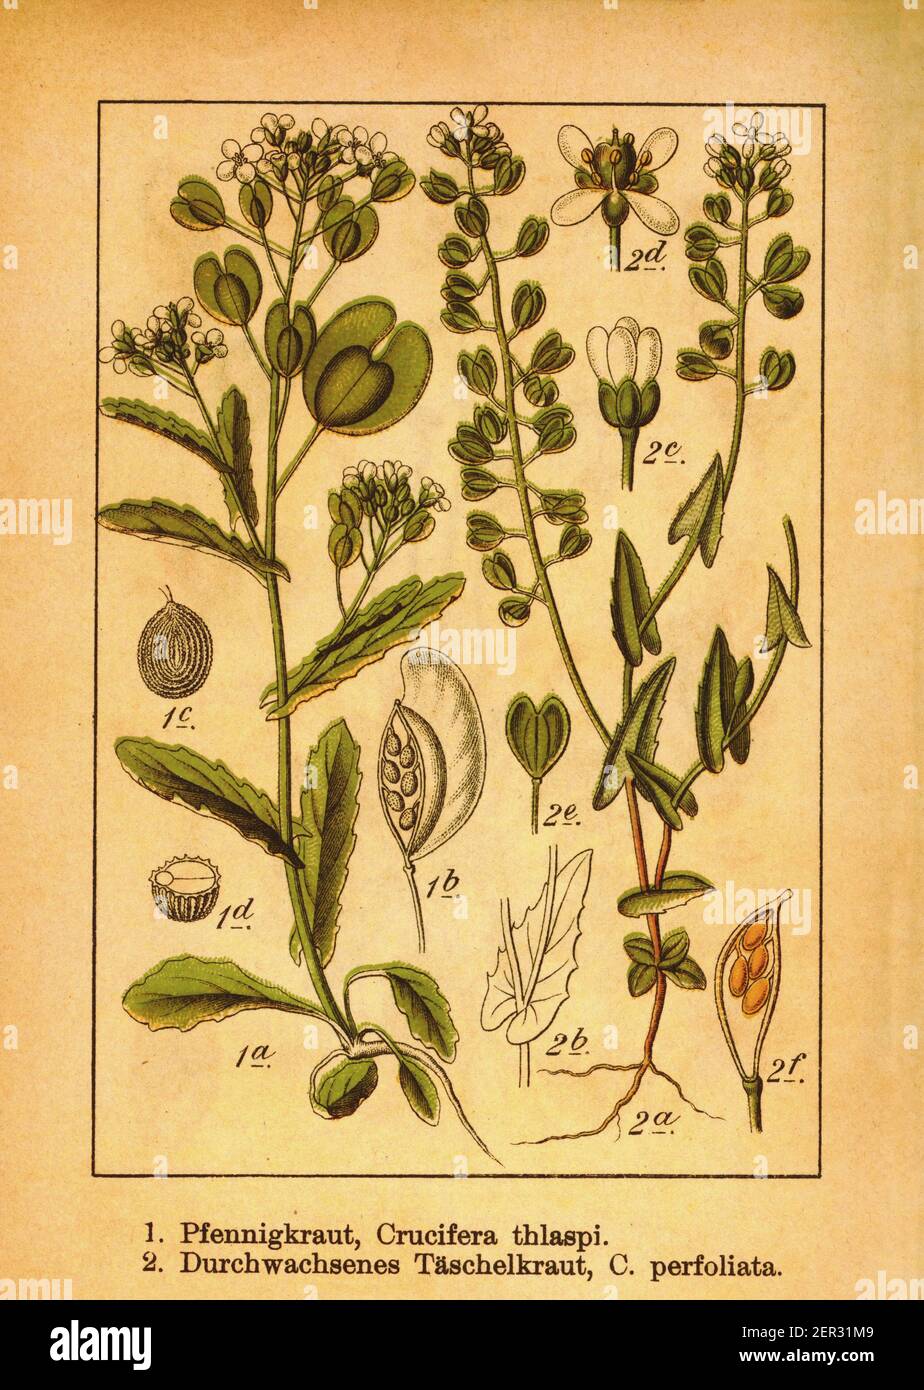 Antique 19th-century engraving of field penny-cress and cotswold penny-cress. Illustration by Jacob Sturm (1771-1848) from the book Deutschlands Flora Stock Photo